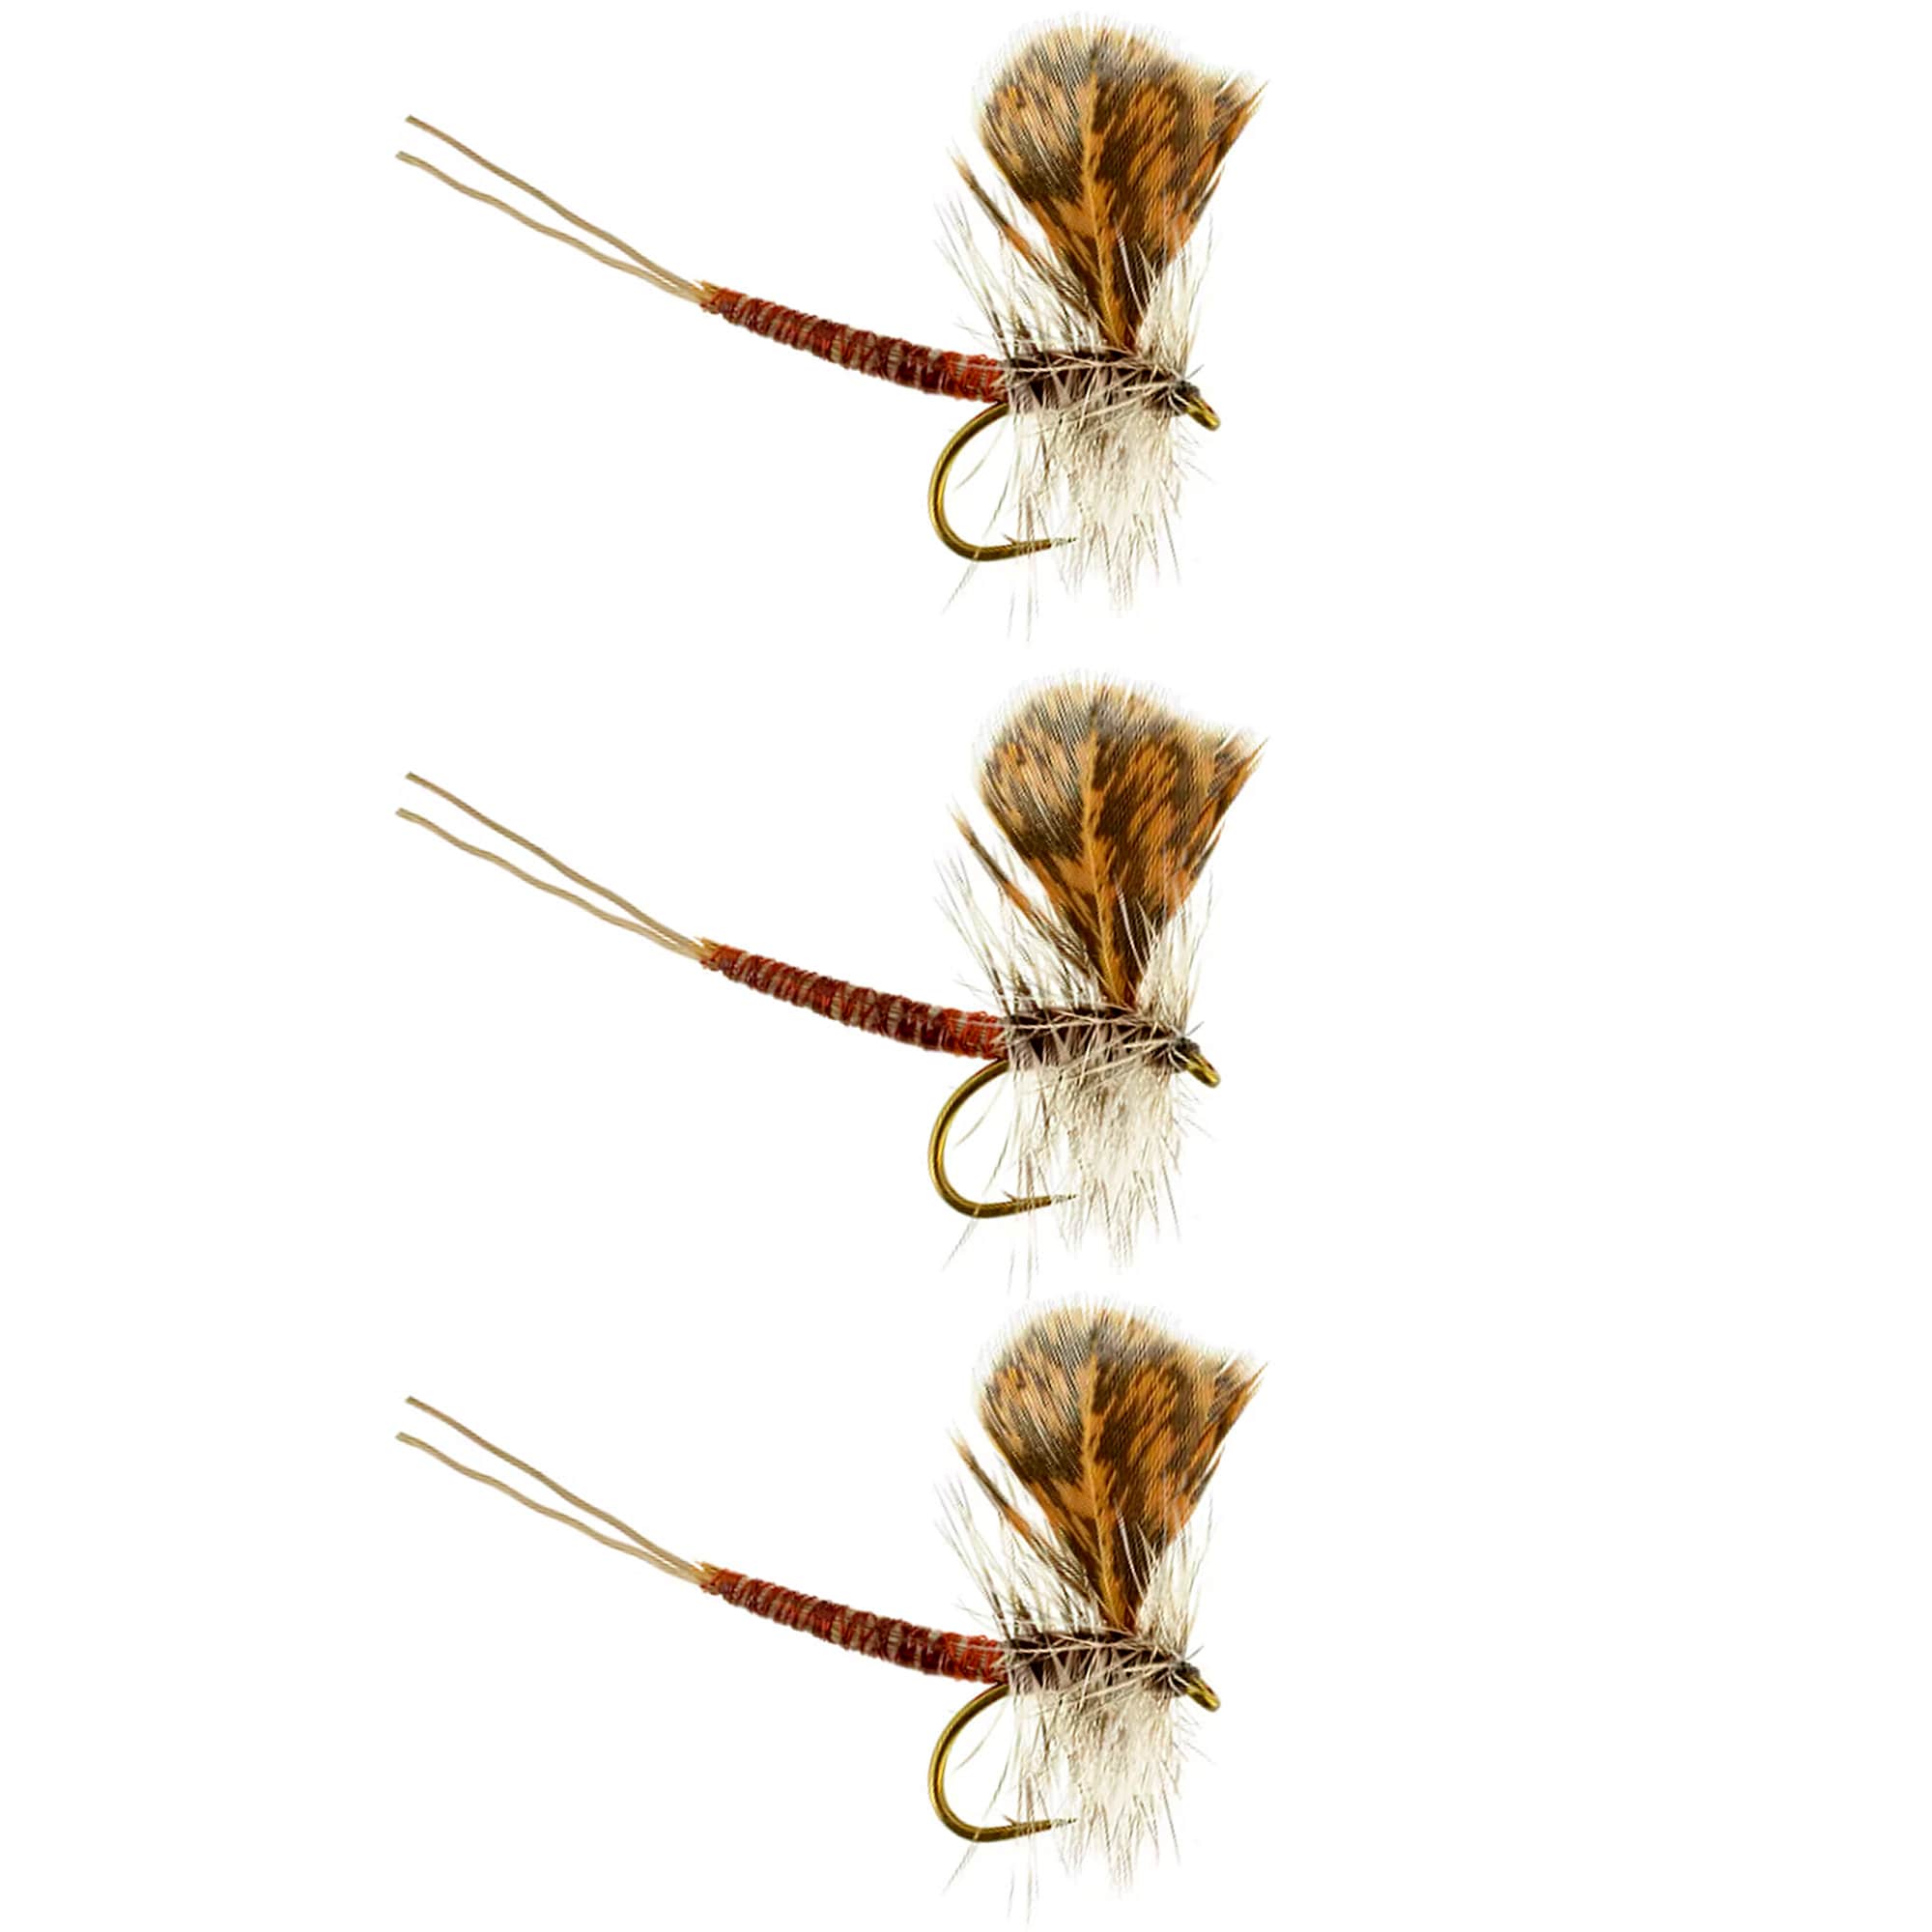 Dry Flies Brown Drake Extended Body Popular Dry Fly for All Fly Boxes Best  Selling Dry Flies 3 Pack of Premium Trout Flies 